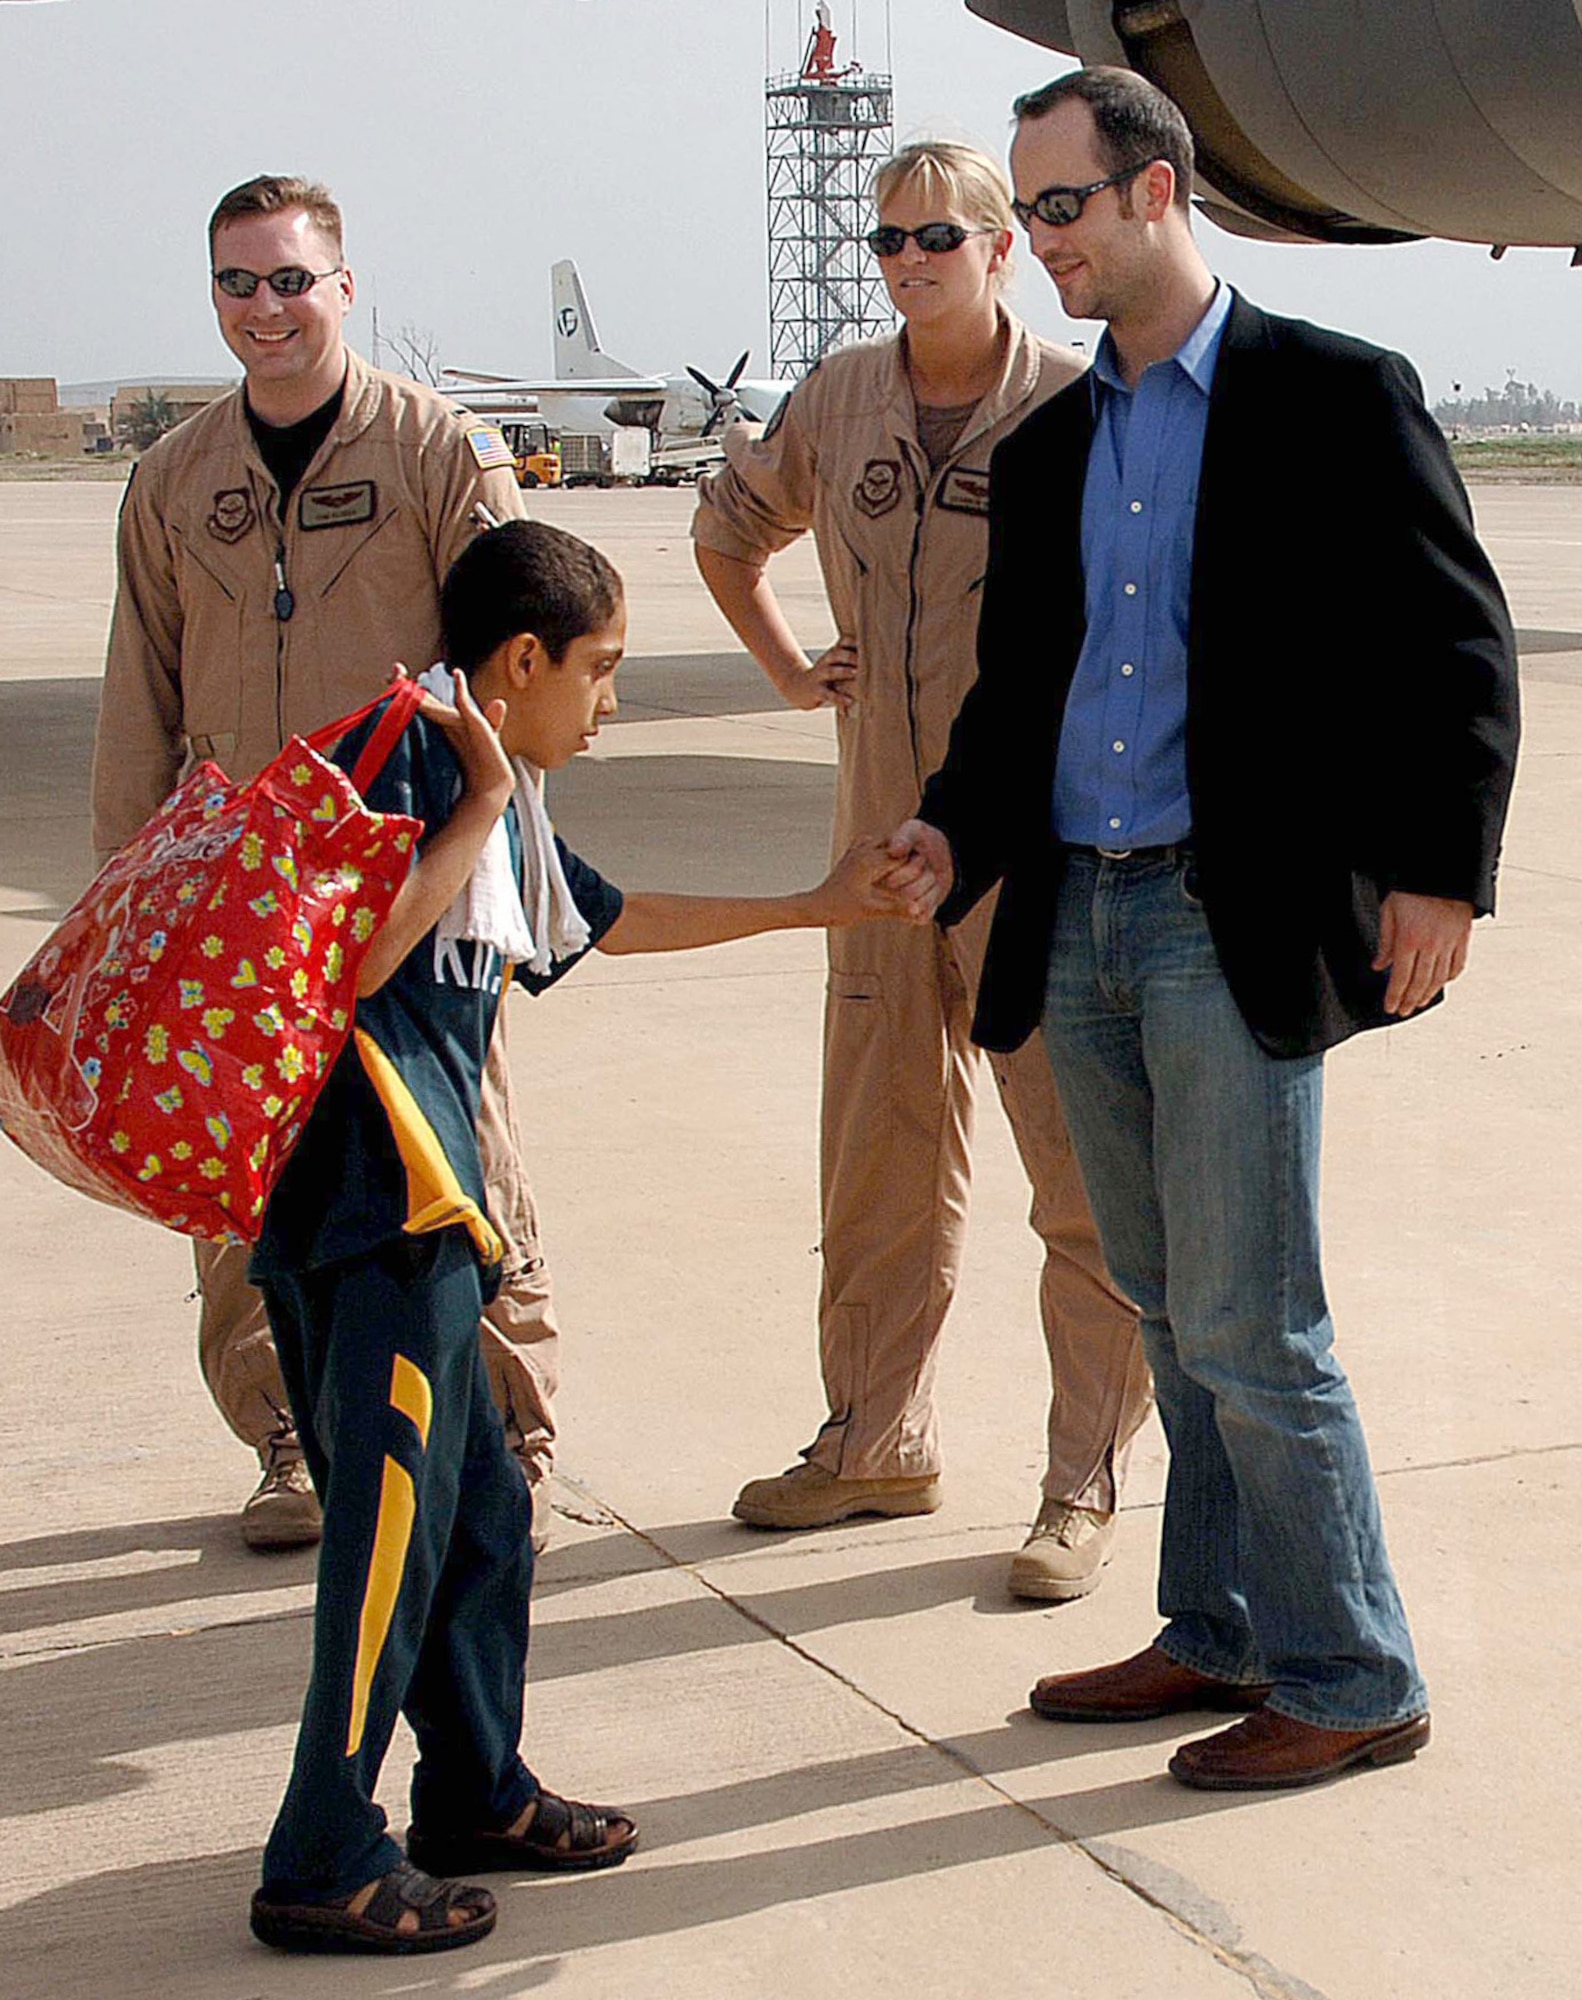 An Iraqi boy thanks Chris Anderson of Operation Smile upon arriving at Baghdad International Airport, Iraq, on Saturday, April 29, 2006. Operation Smile provides corrective surgery for cleft palates and cleft lips. The program provided surgery in Amman, Jordan, to more than 100 Iraqi children. They were flown back to Iraq on an Air Force C-17 Globemaster III. (U.S. Air Force photo/Master Sgt. Will Ackerman)